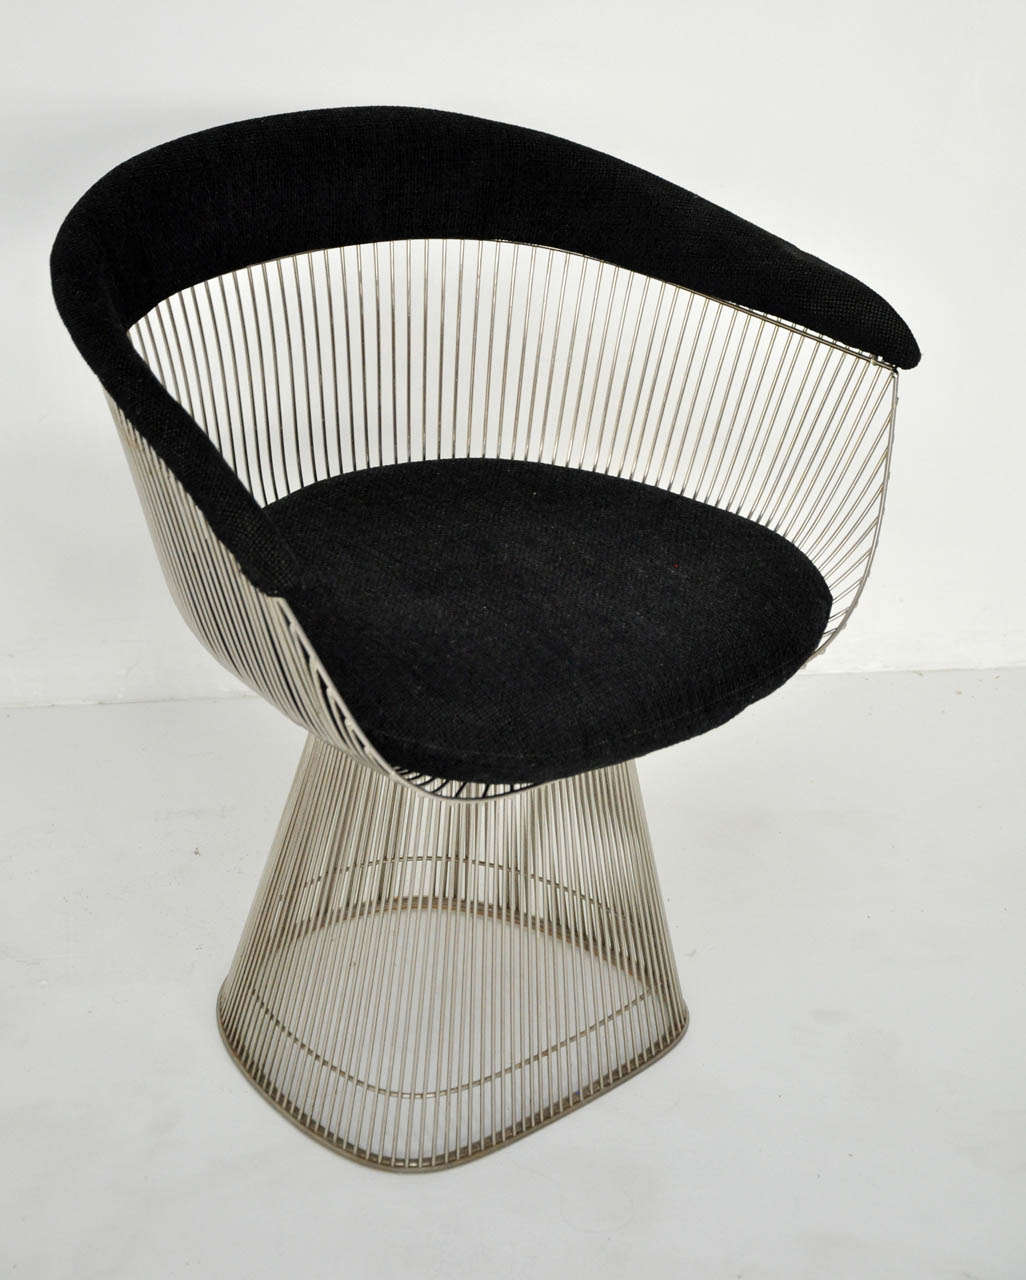 Side chair designed by Warren Platner for Knoll.  Nickel finish.

**Pair available.